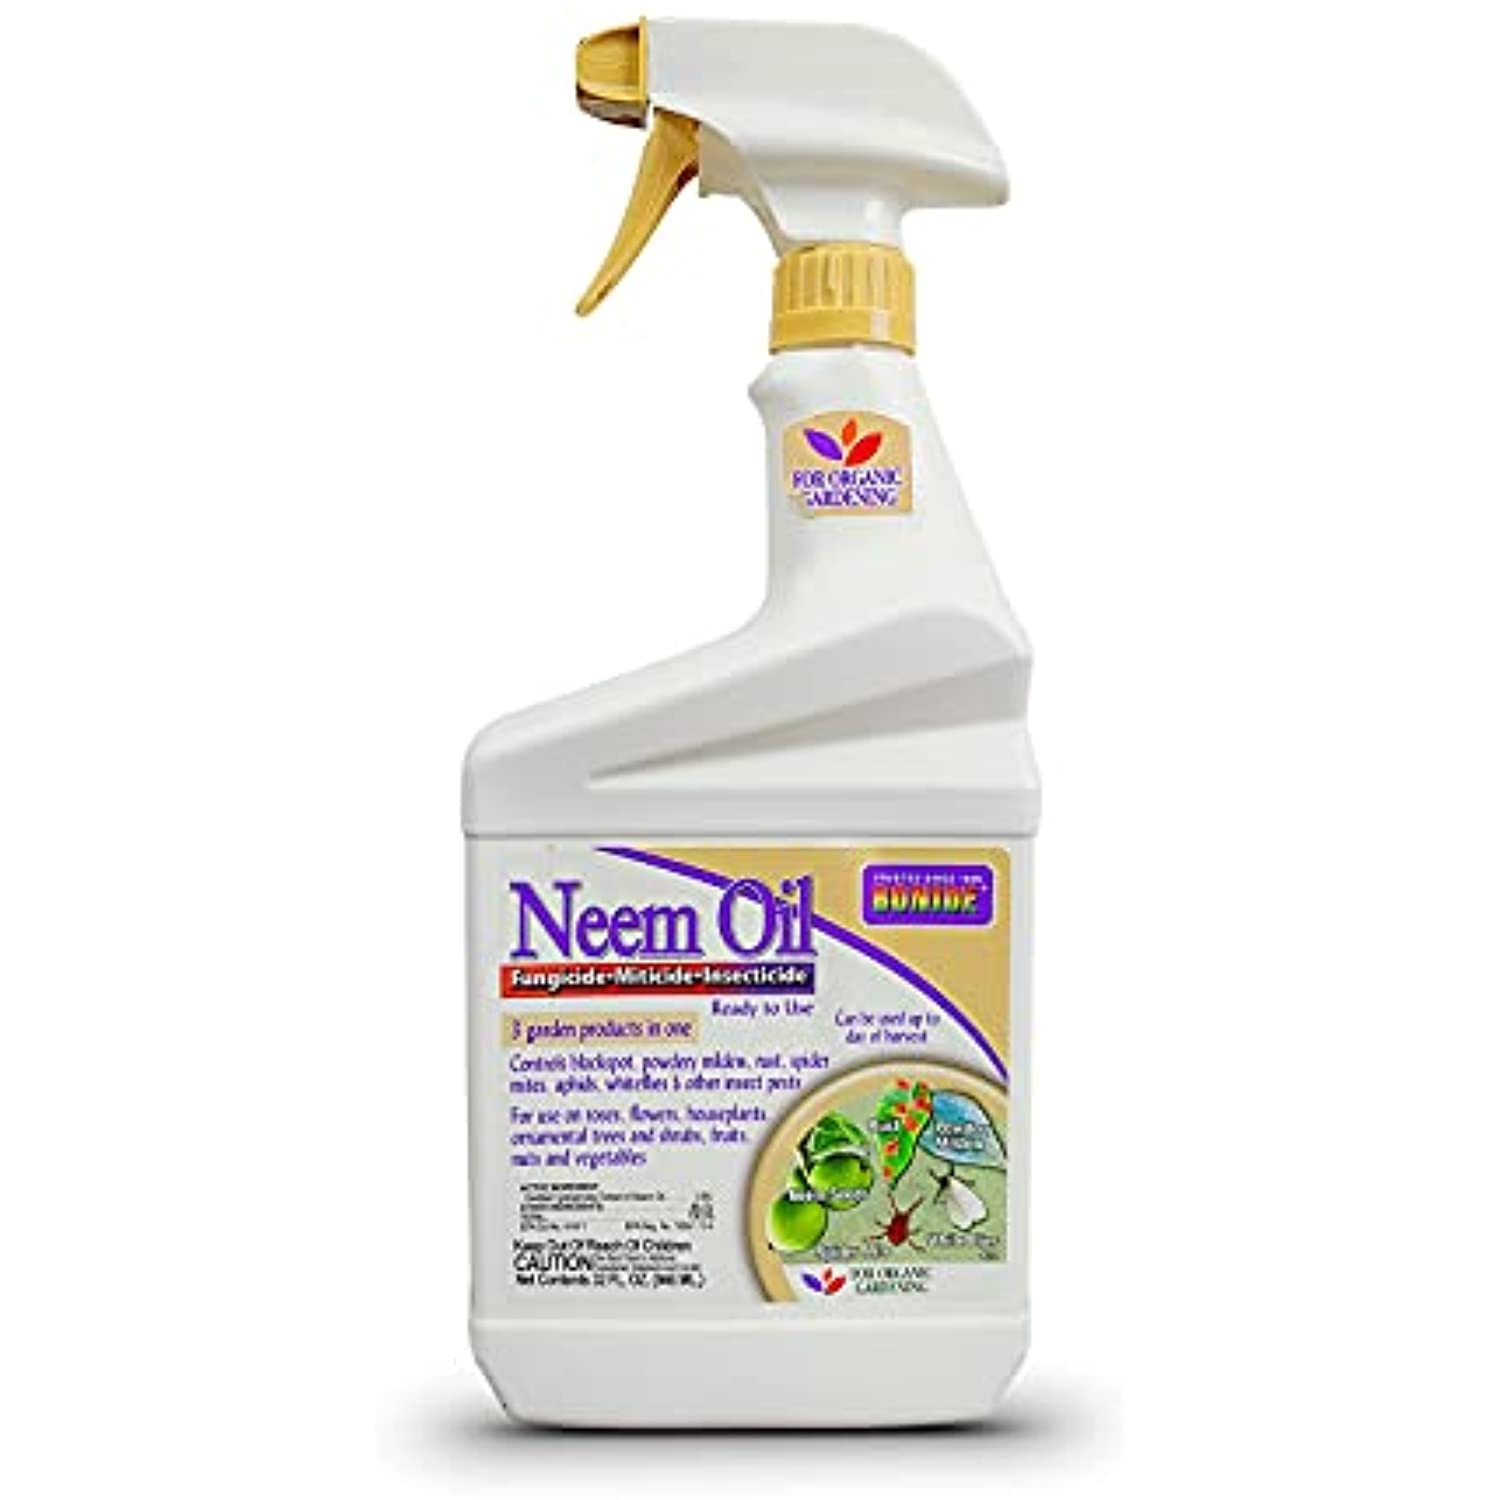 Organic Pet Safe Insect Killer - Bonide Neem Oil 1-Quart, Insect/Disease Control Kills All Stages of Insects, Ready-to-Spray Insecticide, Fungicide & Miticide, Bundled with Centaurus AZ Gloves